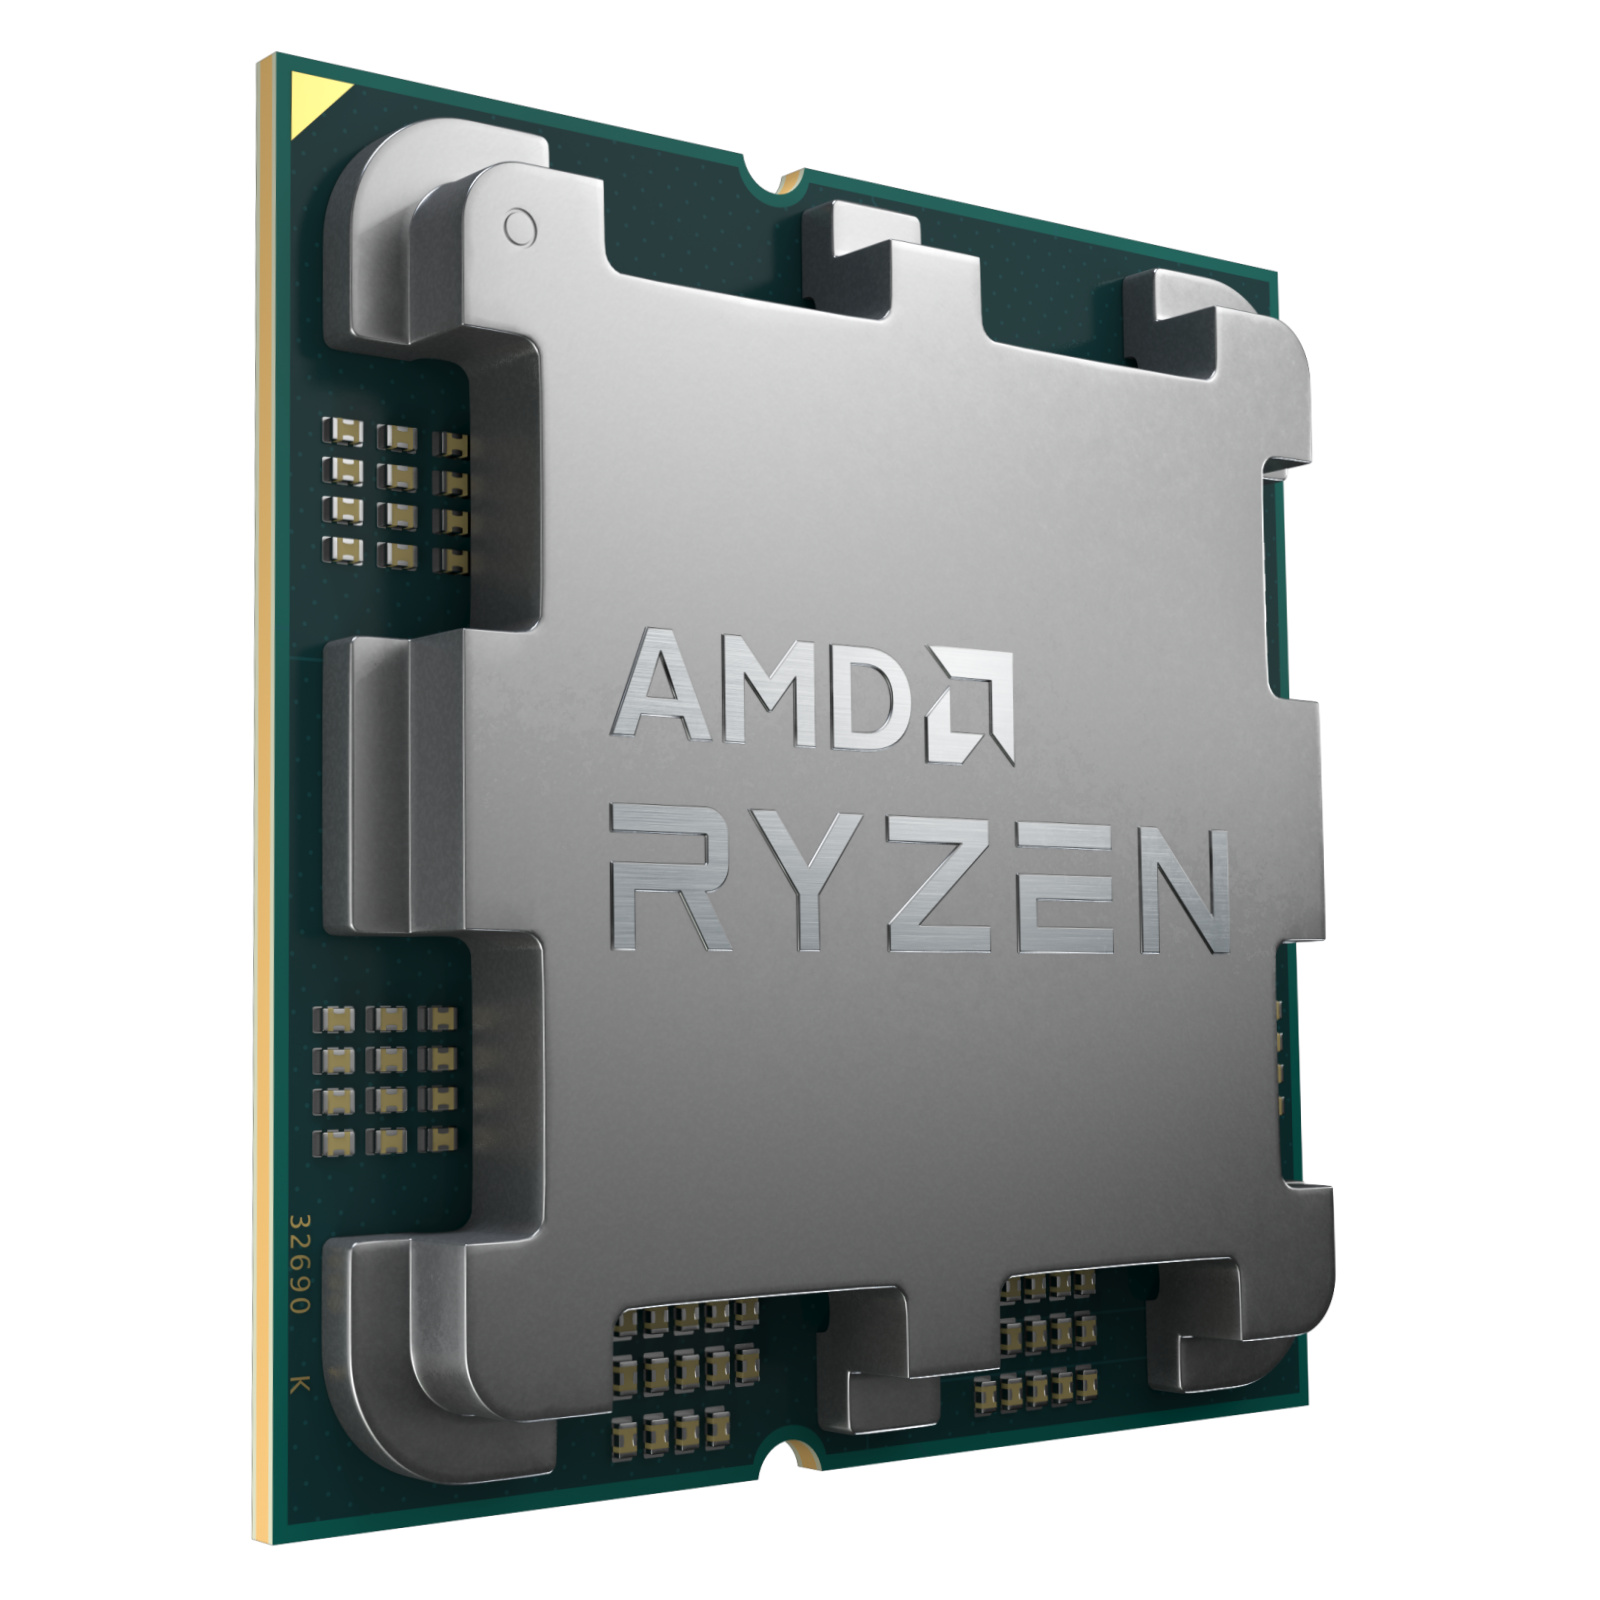 AMD Ryzen 5 7600 3.8GHz Base Clock 6-Core 12-Thread Desktop Processor CPU,  AM5 Socket, Integrated Graphics, for High End Computer Enthusiastic Gaming